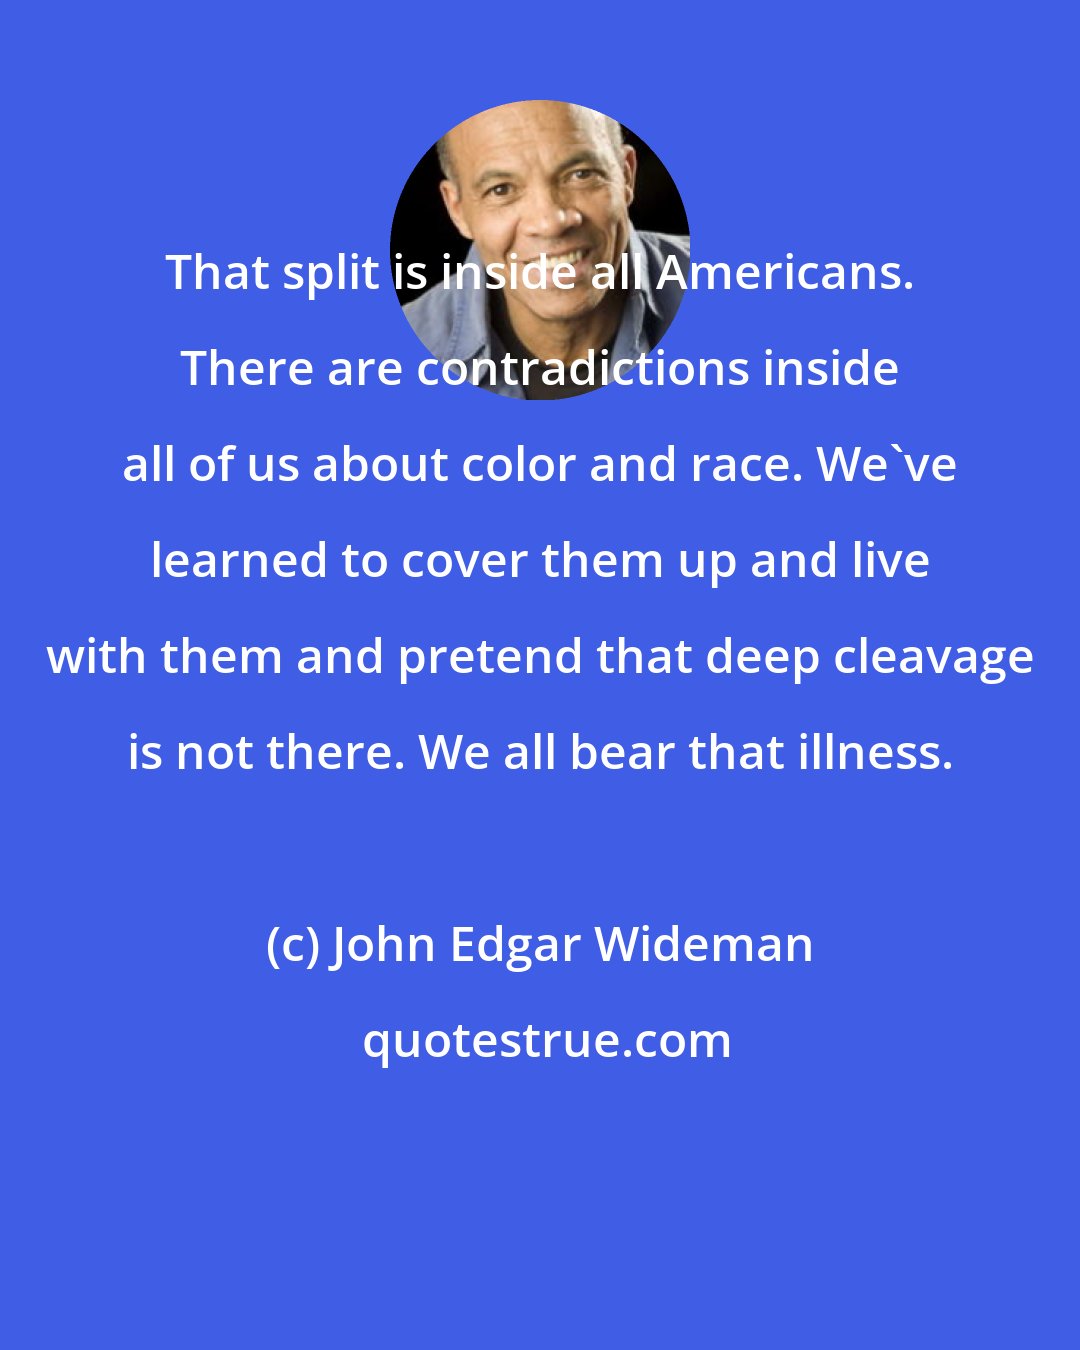 John Edgar Wideman: That split is inside all Americans. There are contradictions inside all of us about color and race. We've learned to cover them up and live with them and pretend that deep cleavage is not there. We all bear that illness.